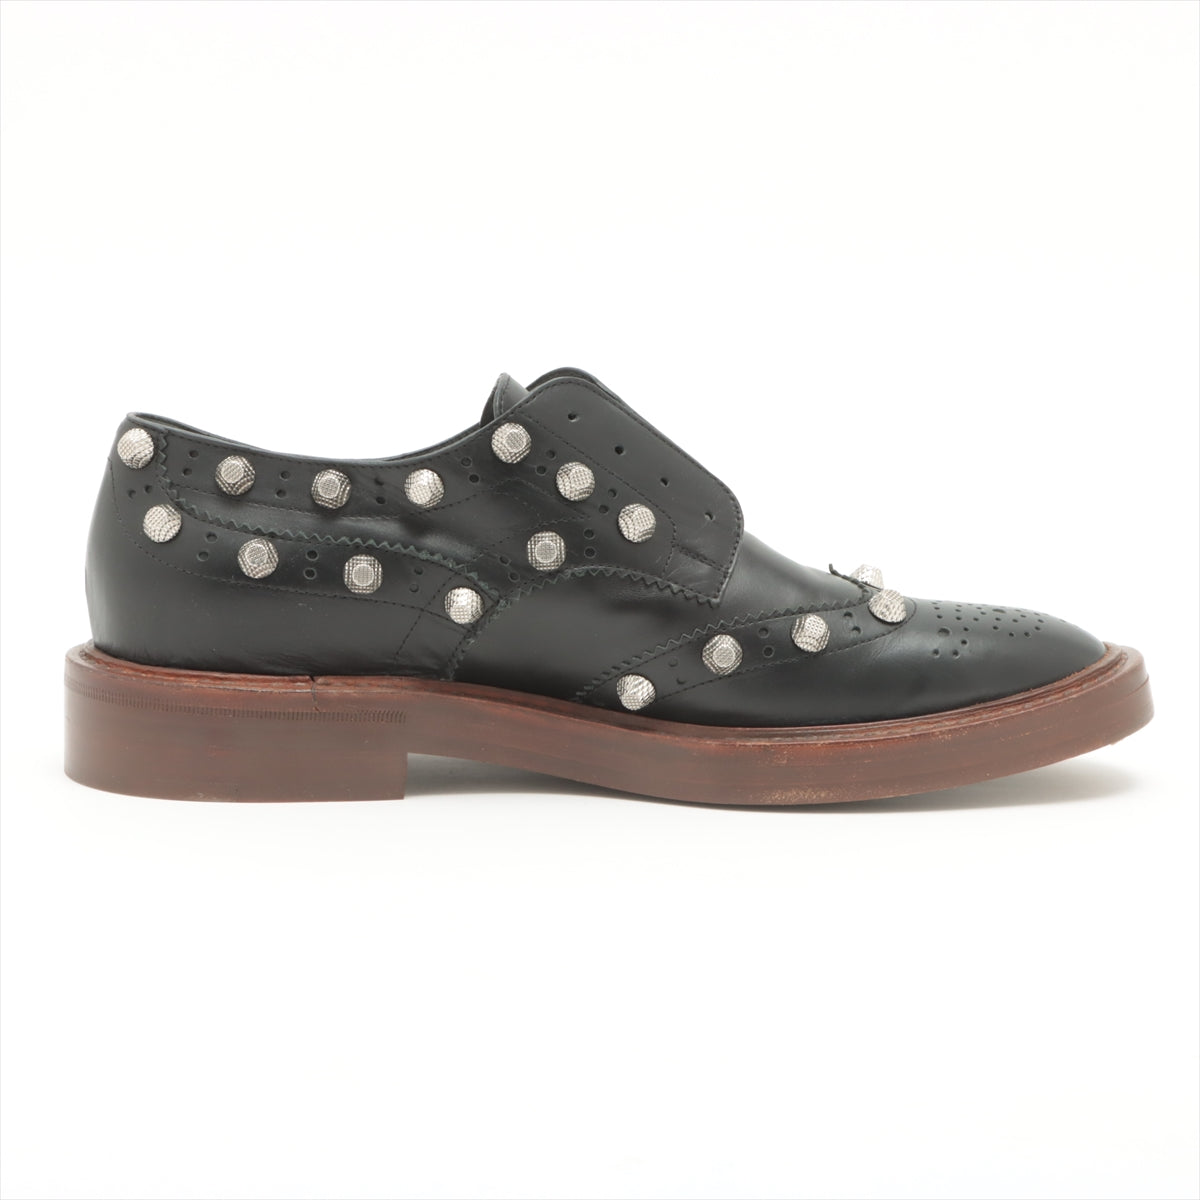 Balenciaga Leather Leather shoes 40 Men's Black × Brown Studs Slip-on wingtip